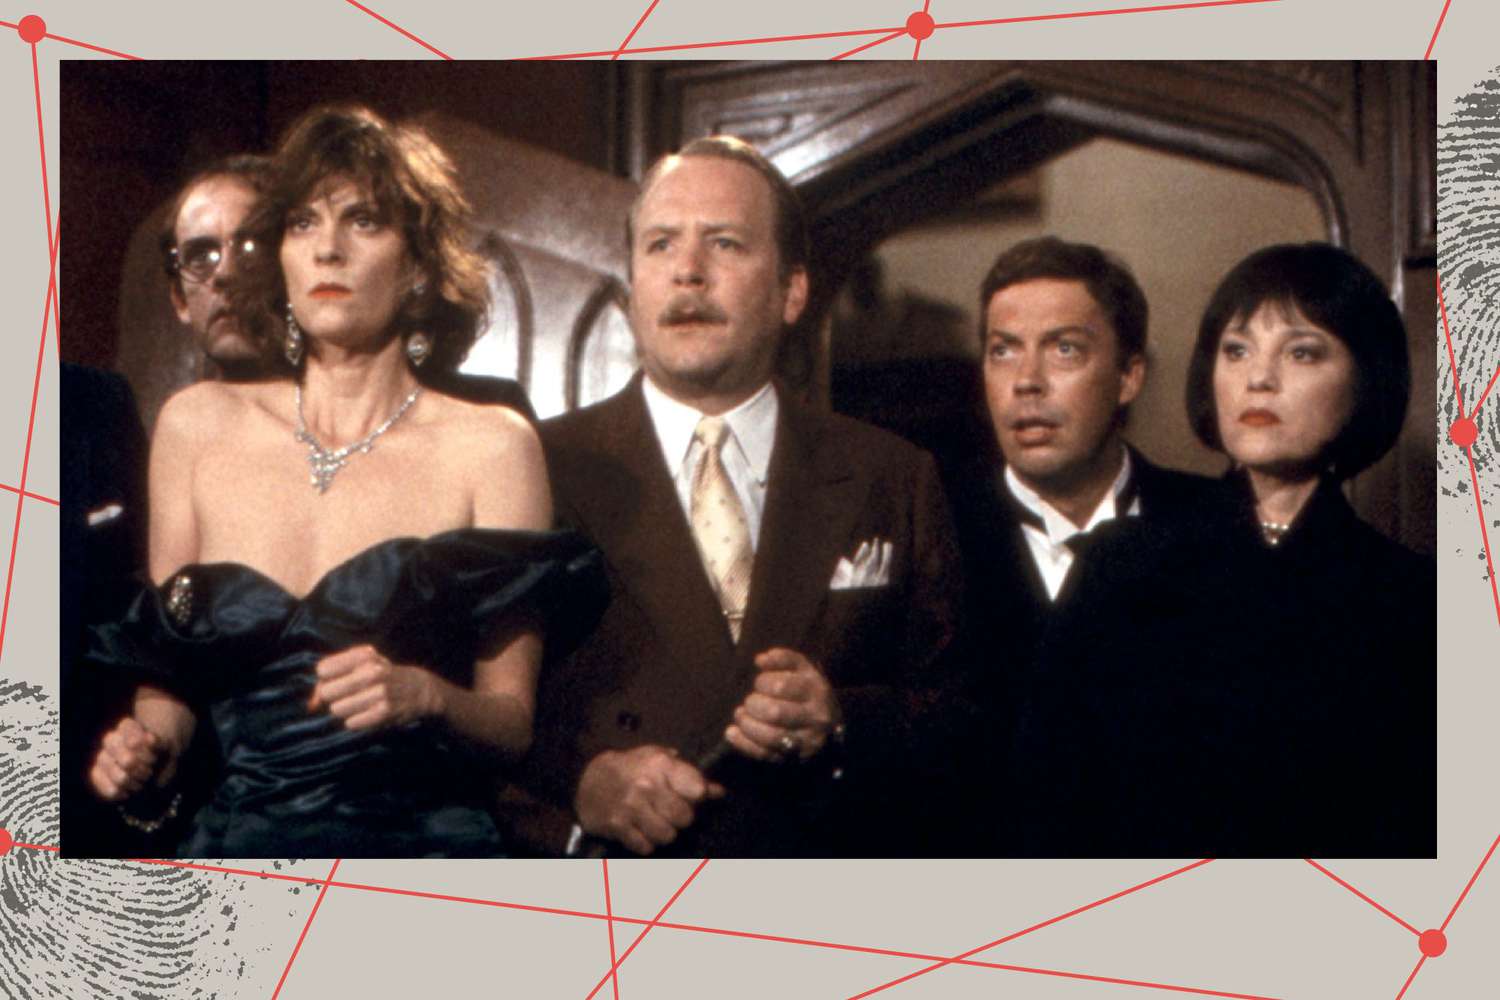 An oral history of 'Clue,' the classic whodunnit